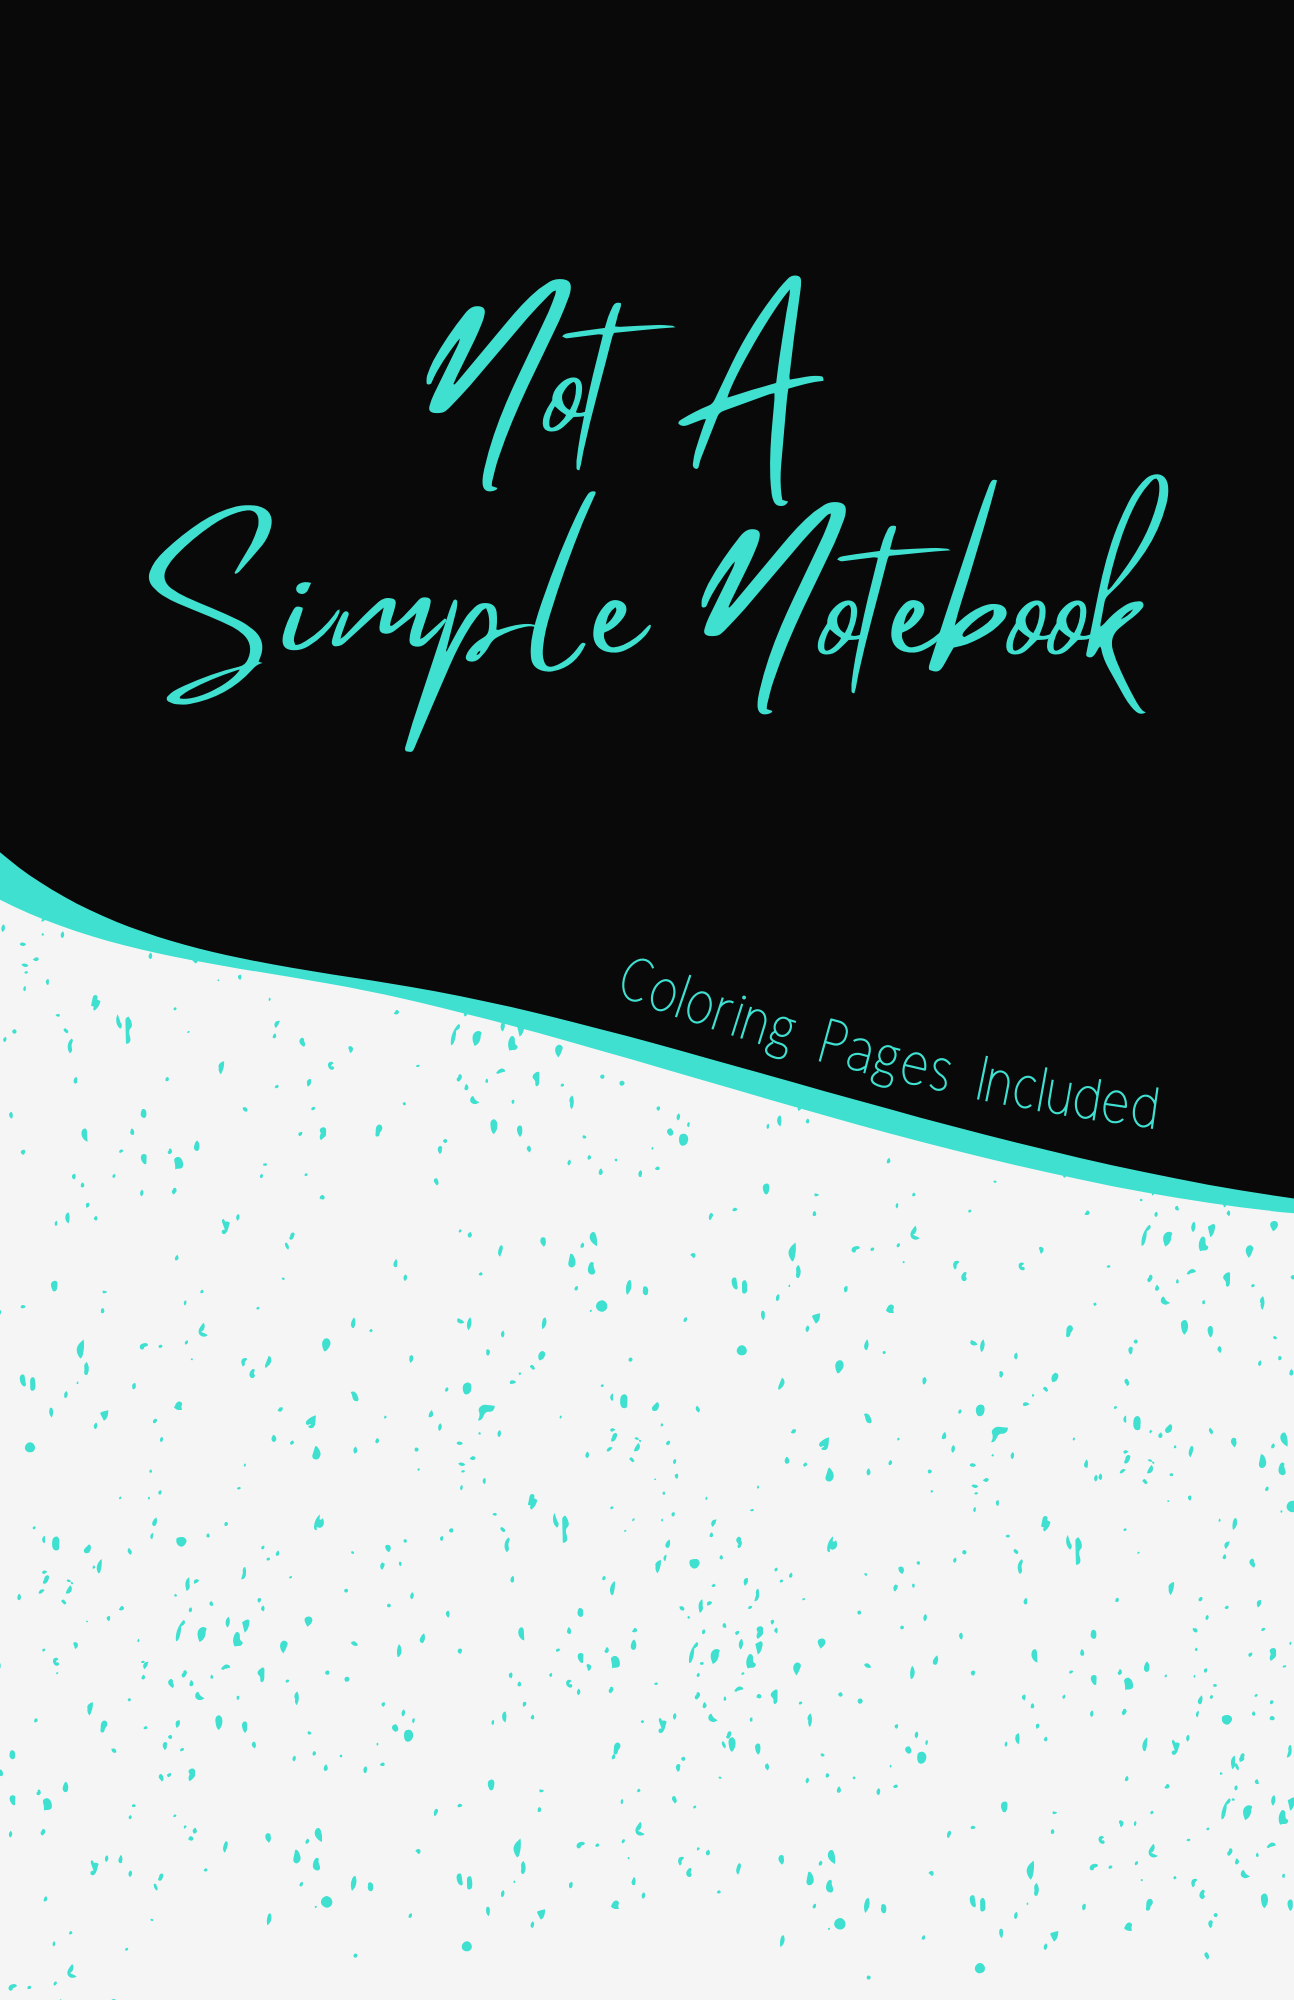 Not A Simple Notebook